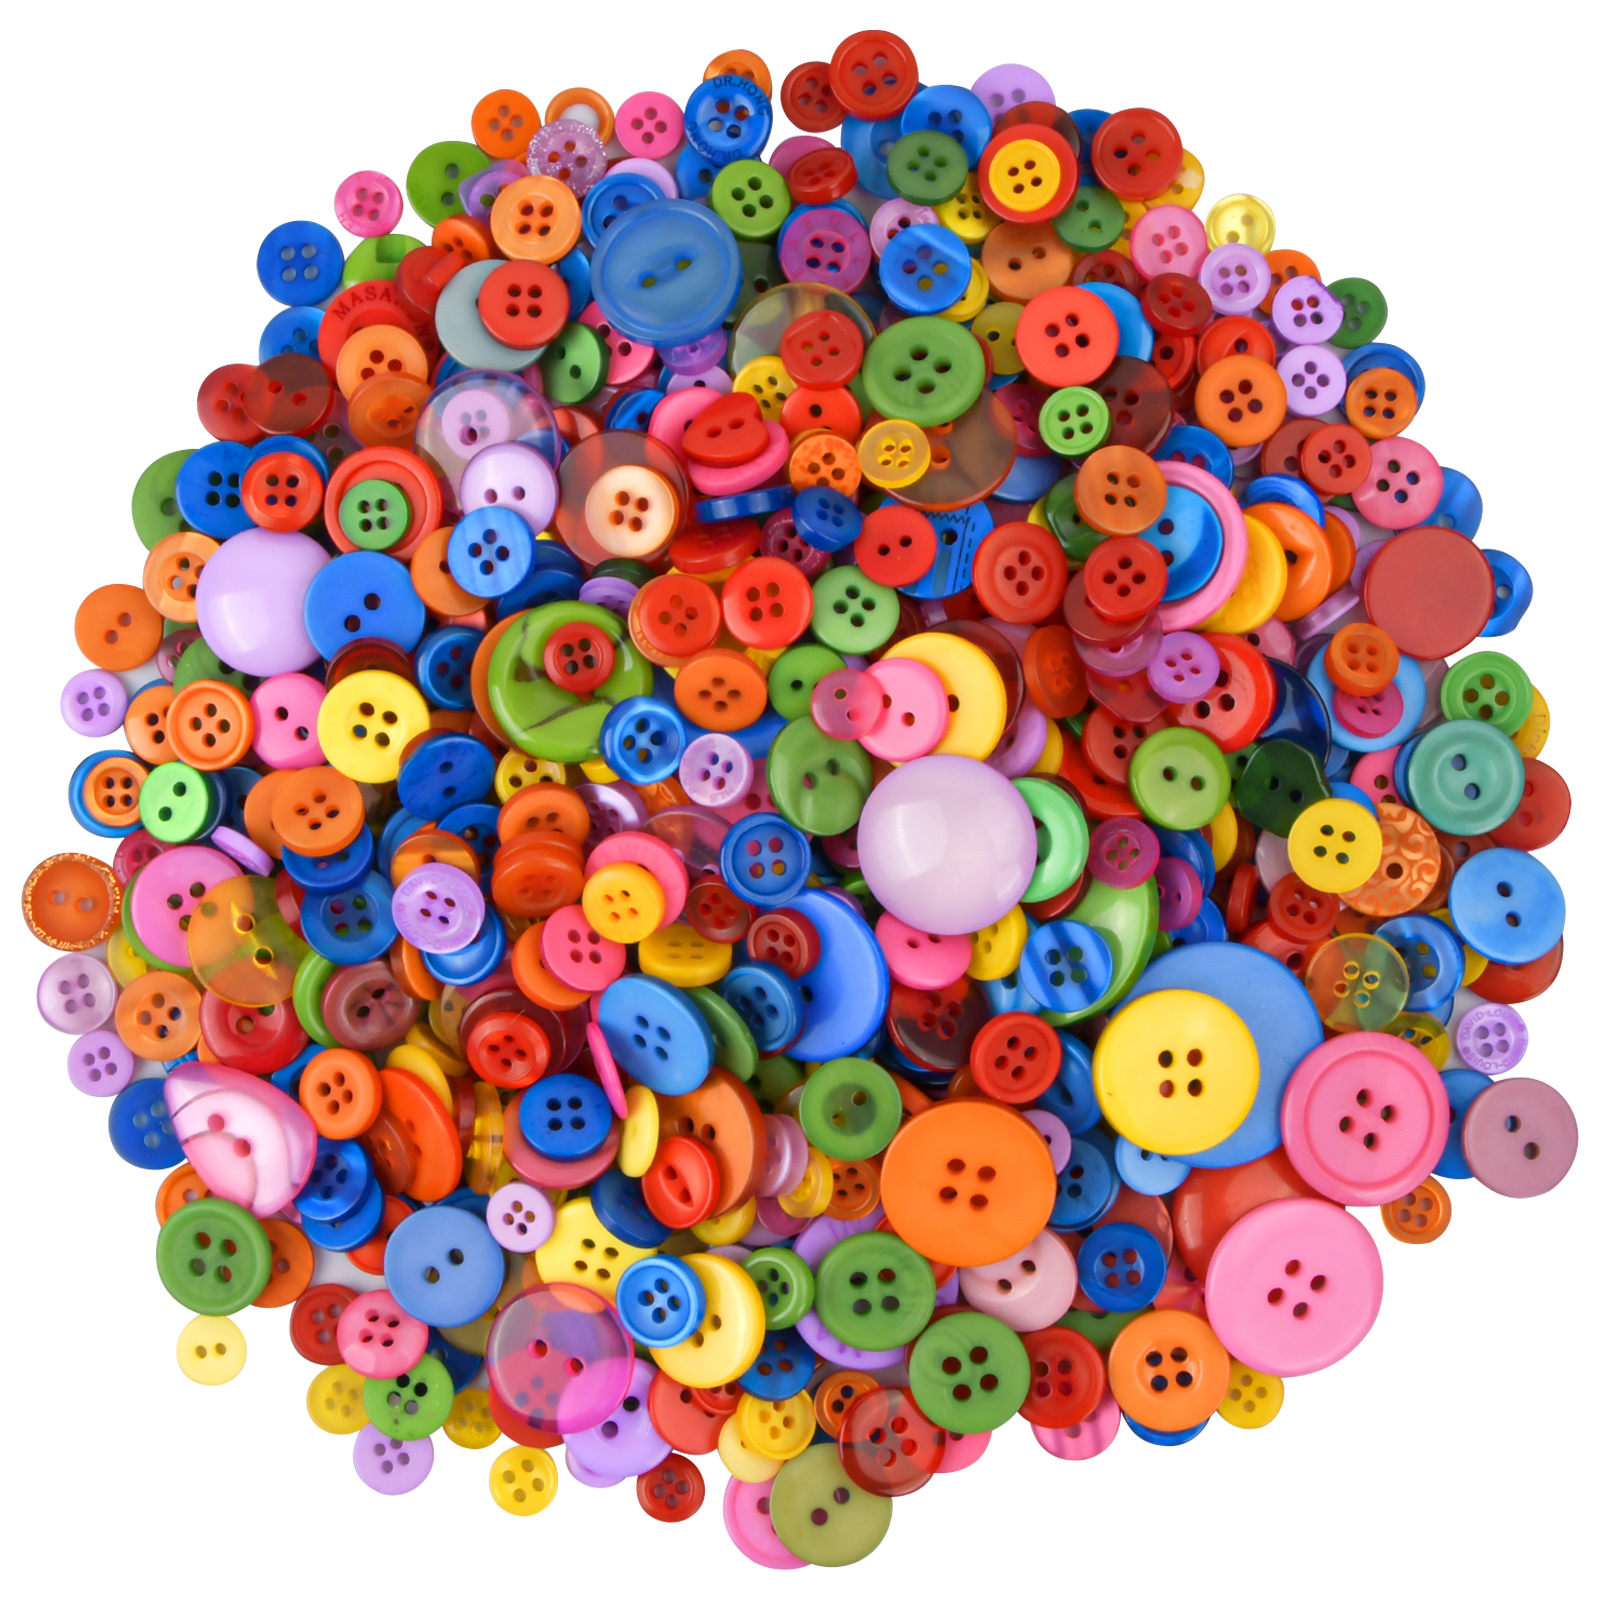 Solid Multicolor Buttons 20mm Colorful Buttons for Shirt, Dress, Craft  ,sewing Buttons 6,12,24,36,60,120 Pcs 